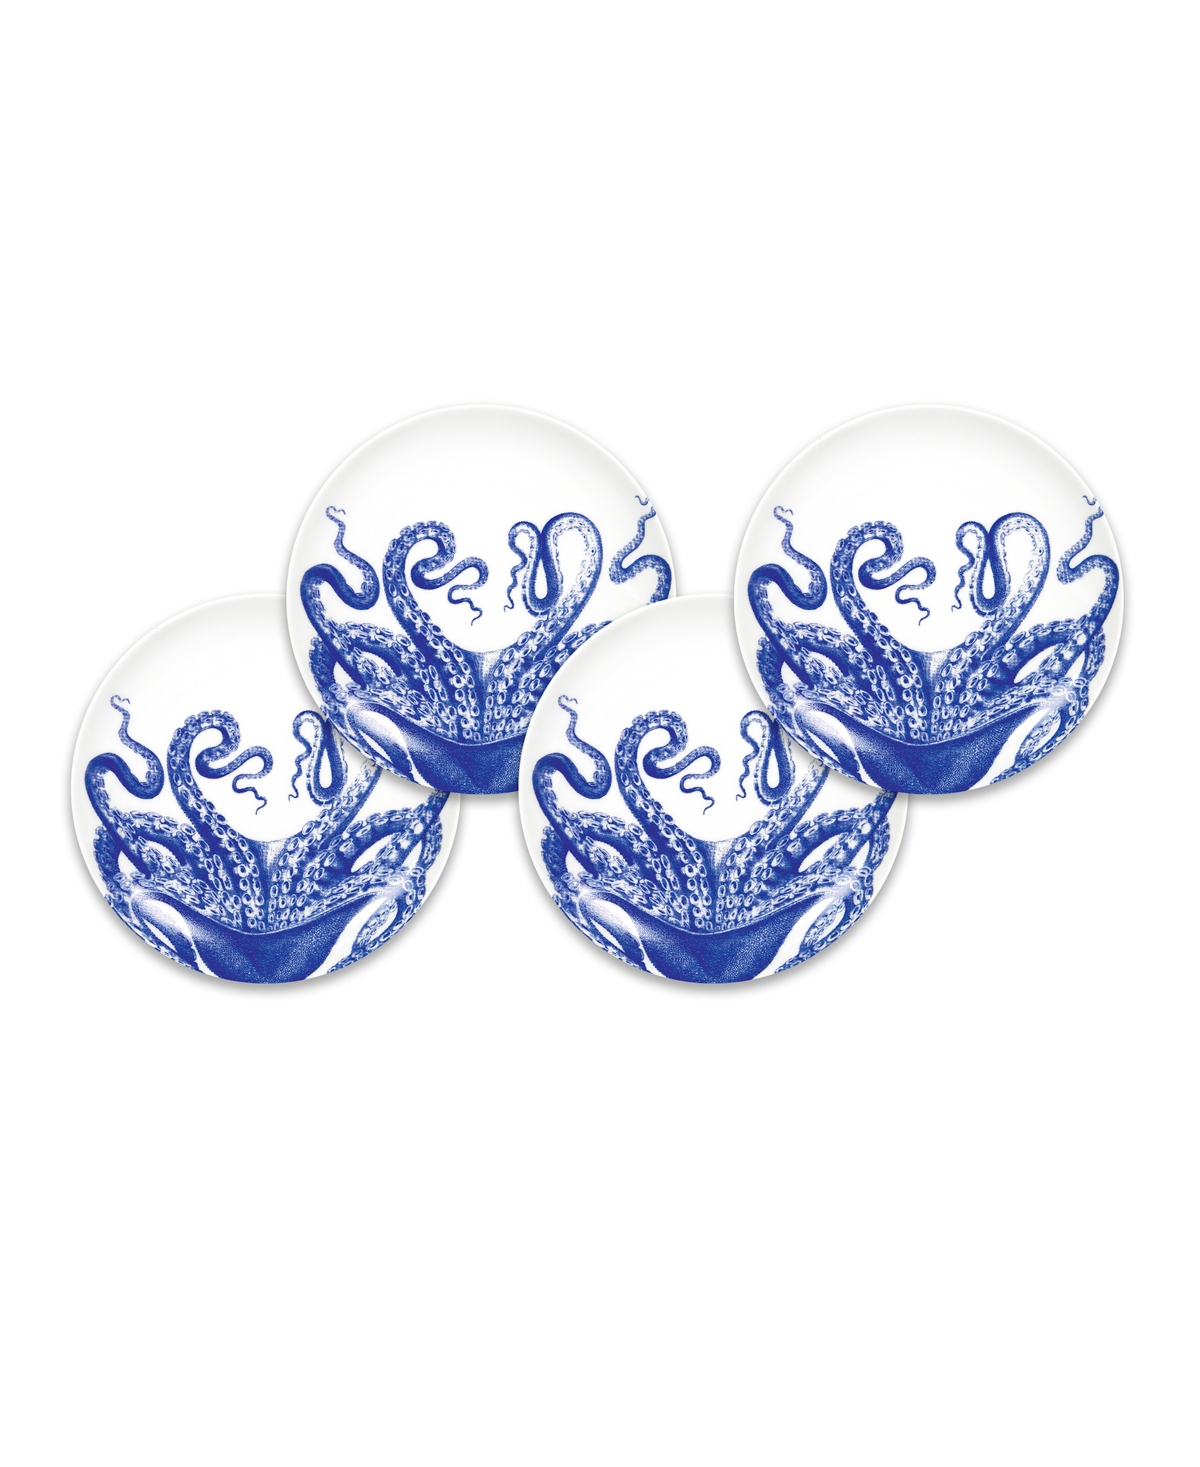 Lucy Octopus Canape Plate, Set of 4 - Blue on White